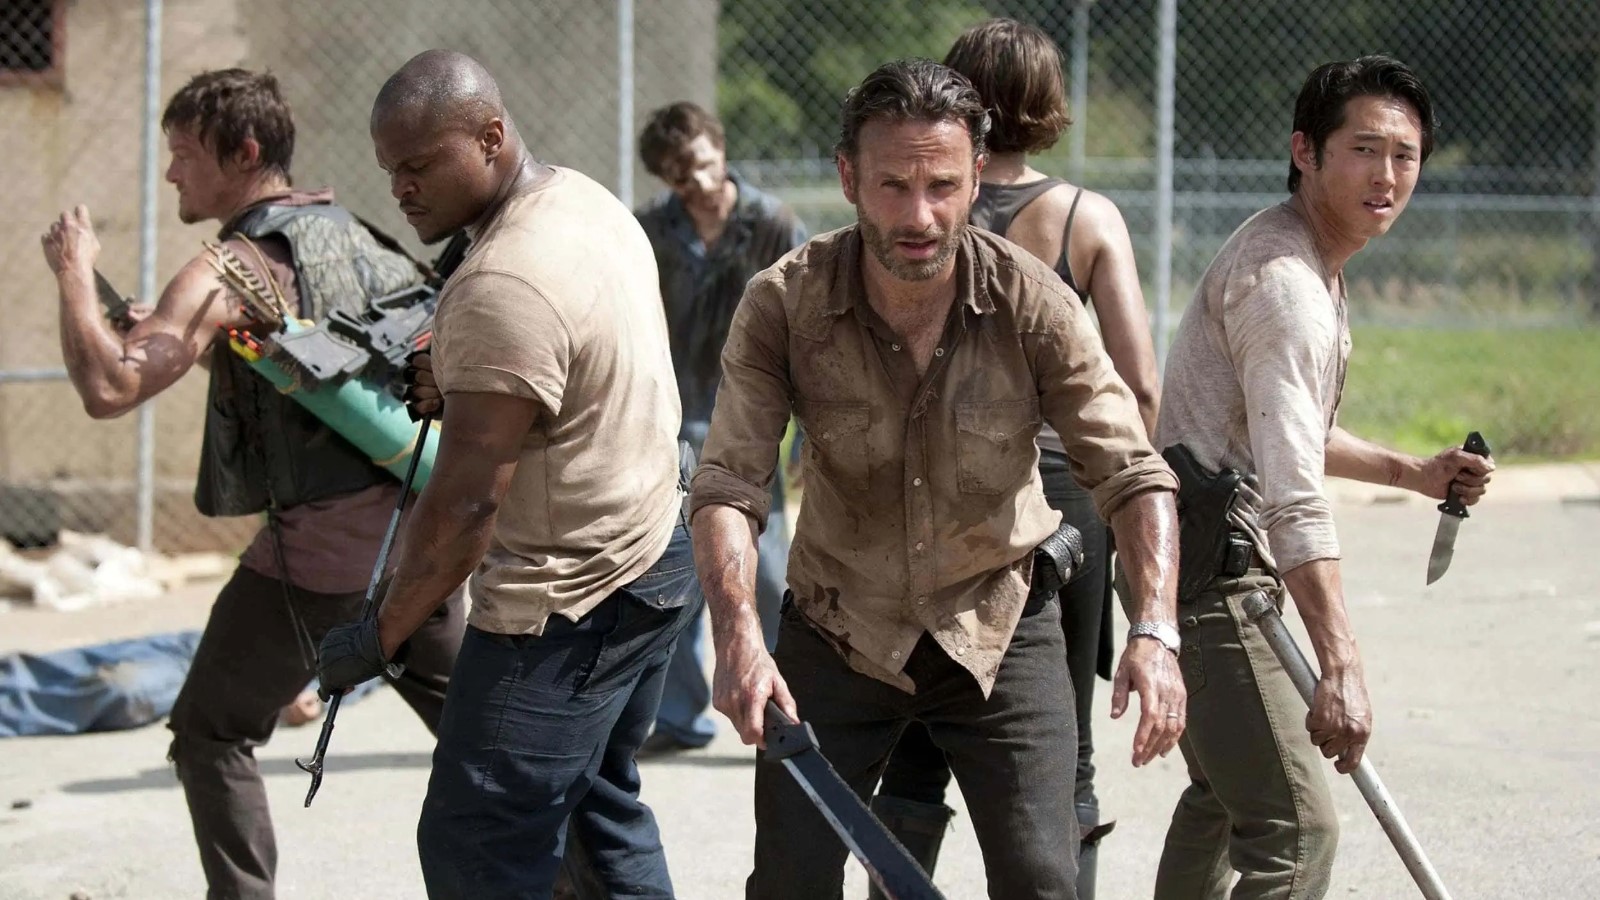 The Walking Dead timeline in order - how to watch chronologically